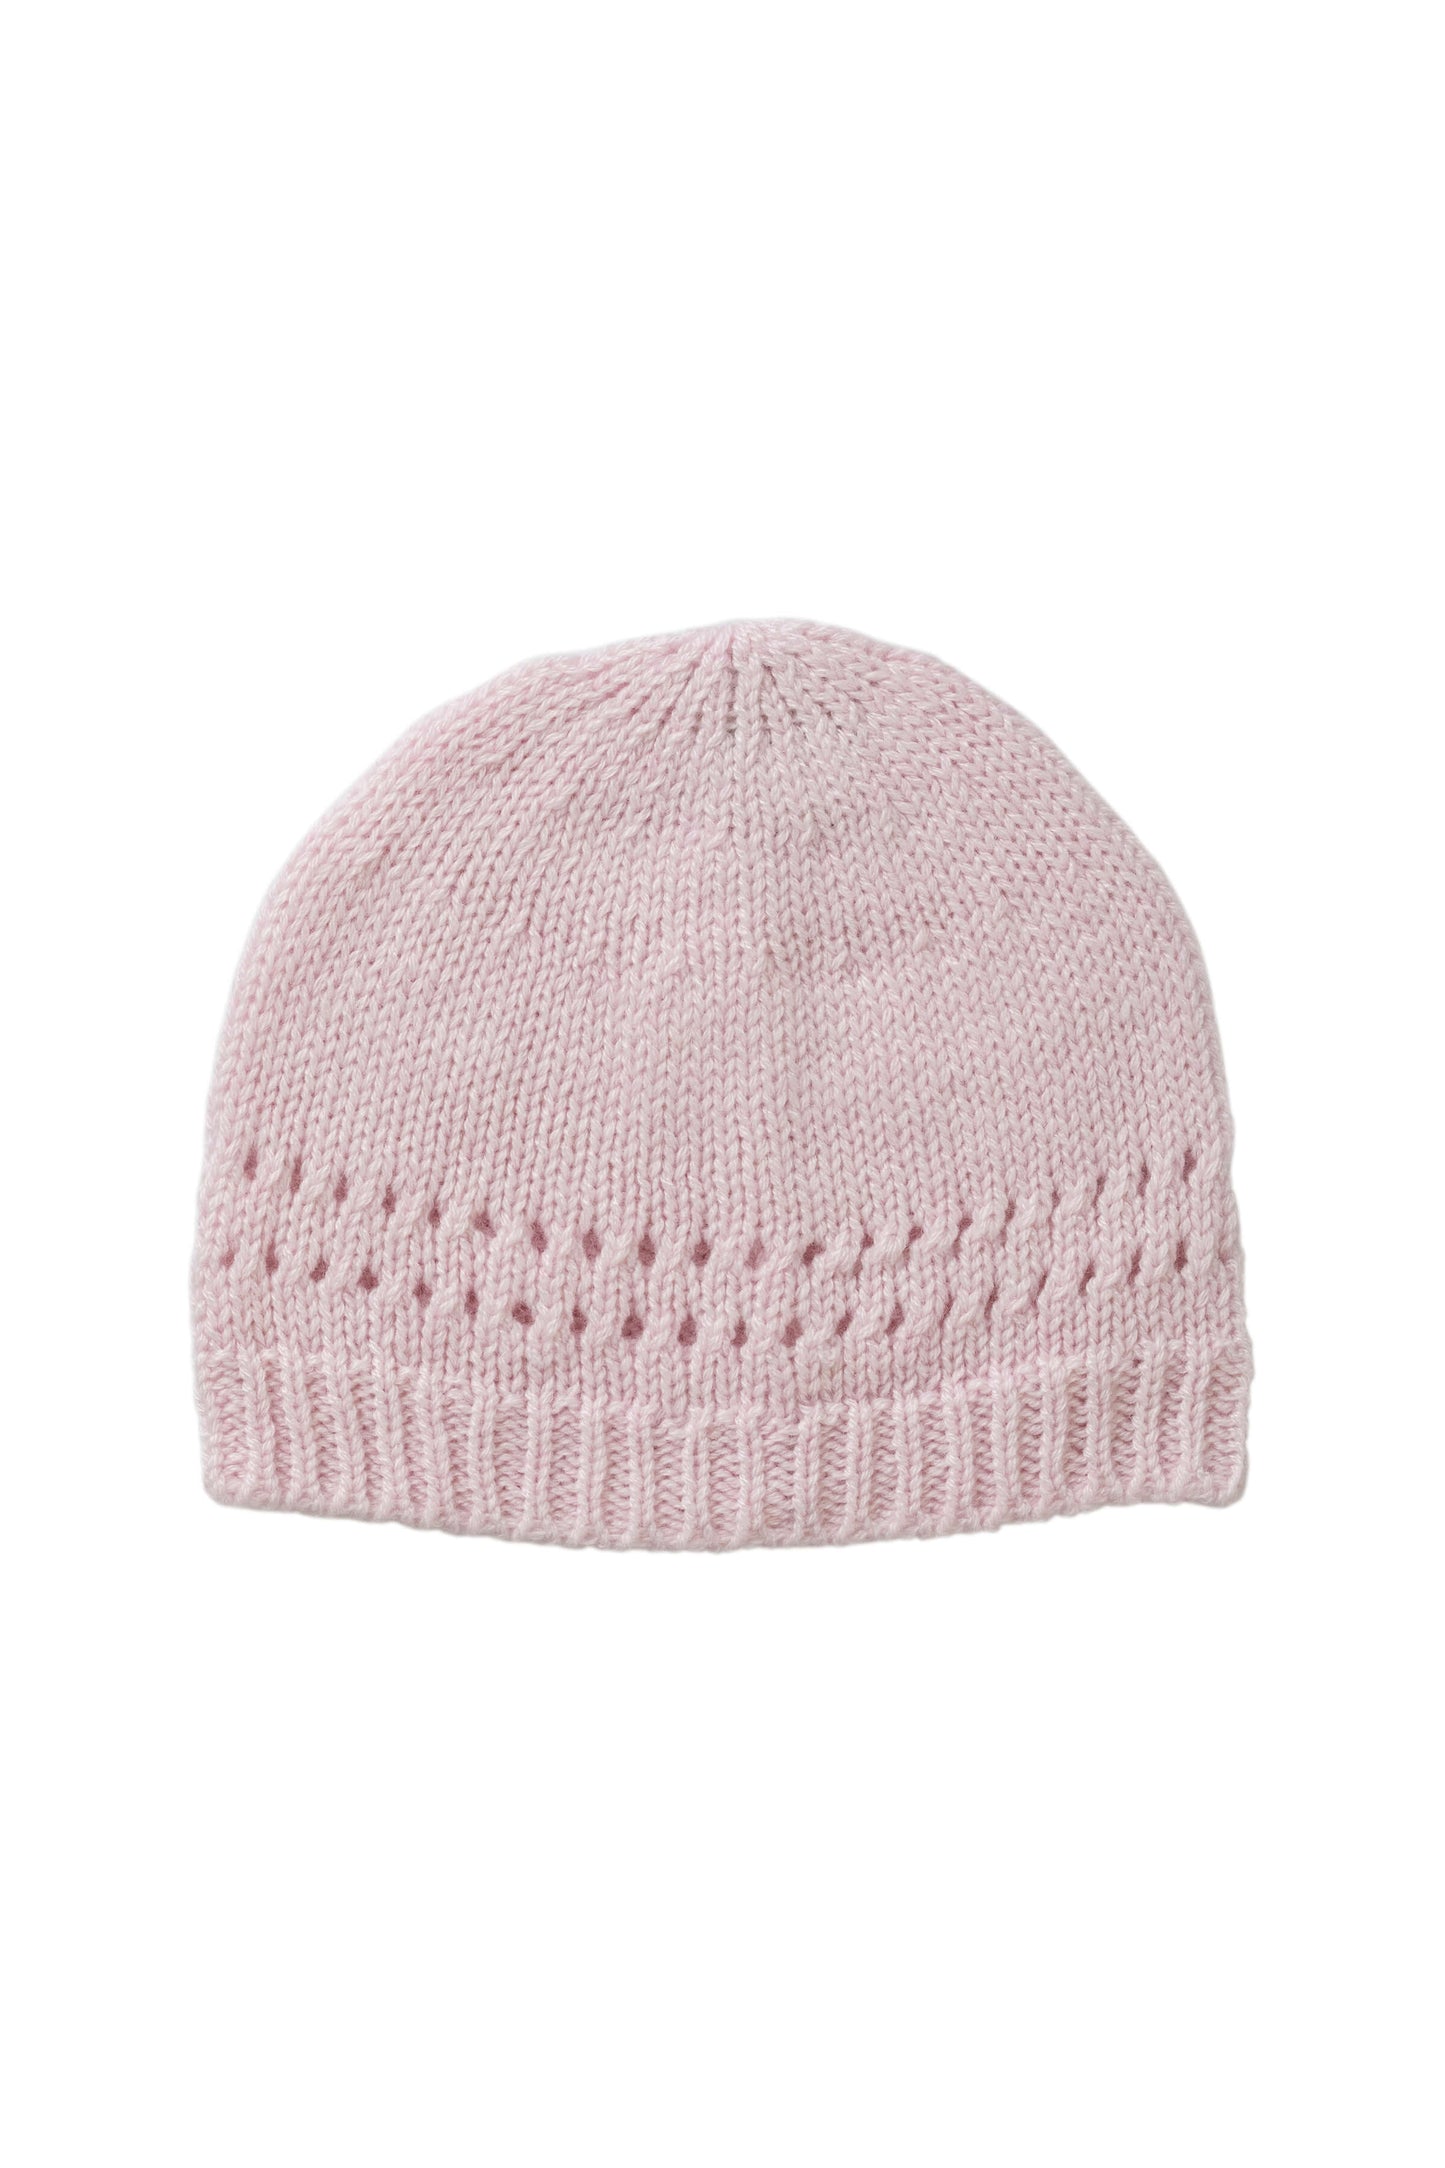 Johnstons of Elgin Baby Handknits Blush Hand Knitted Cashmere Baby Beanie 79011Se0208ONE